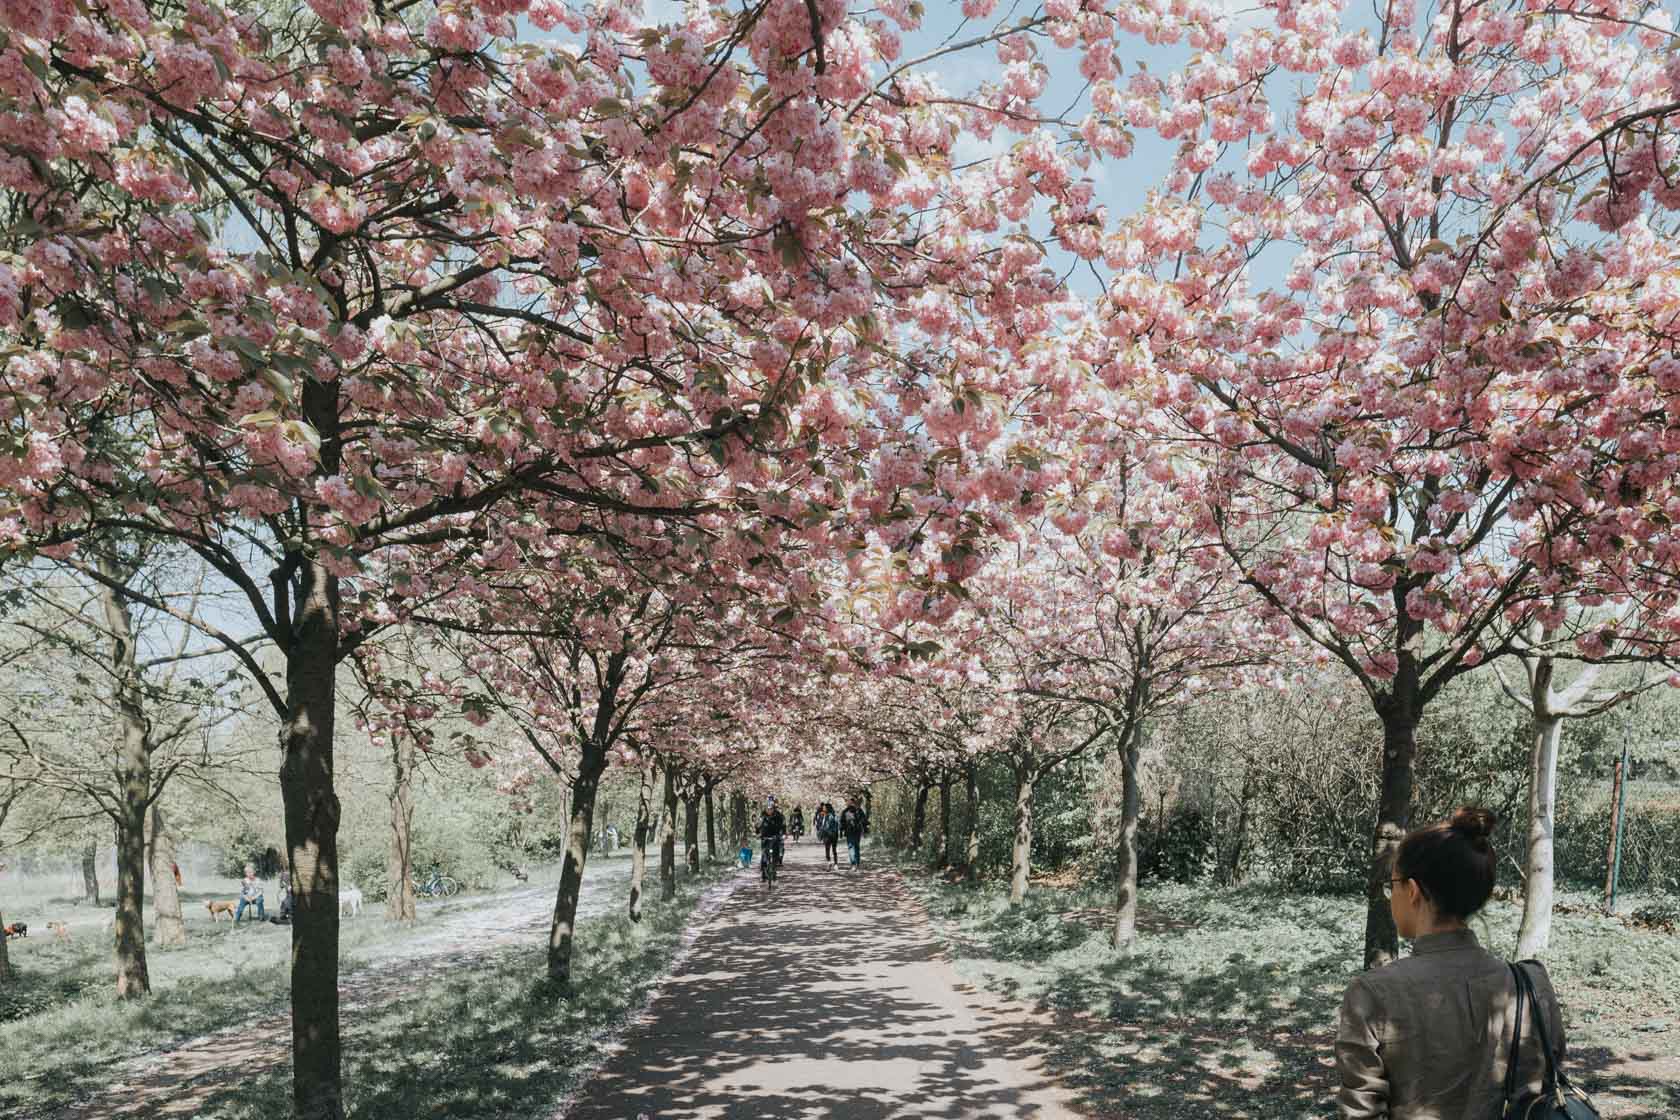 Cherry blossoms in Berlin